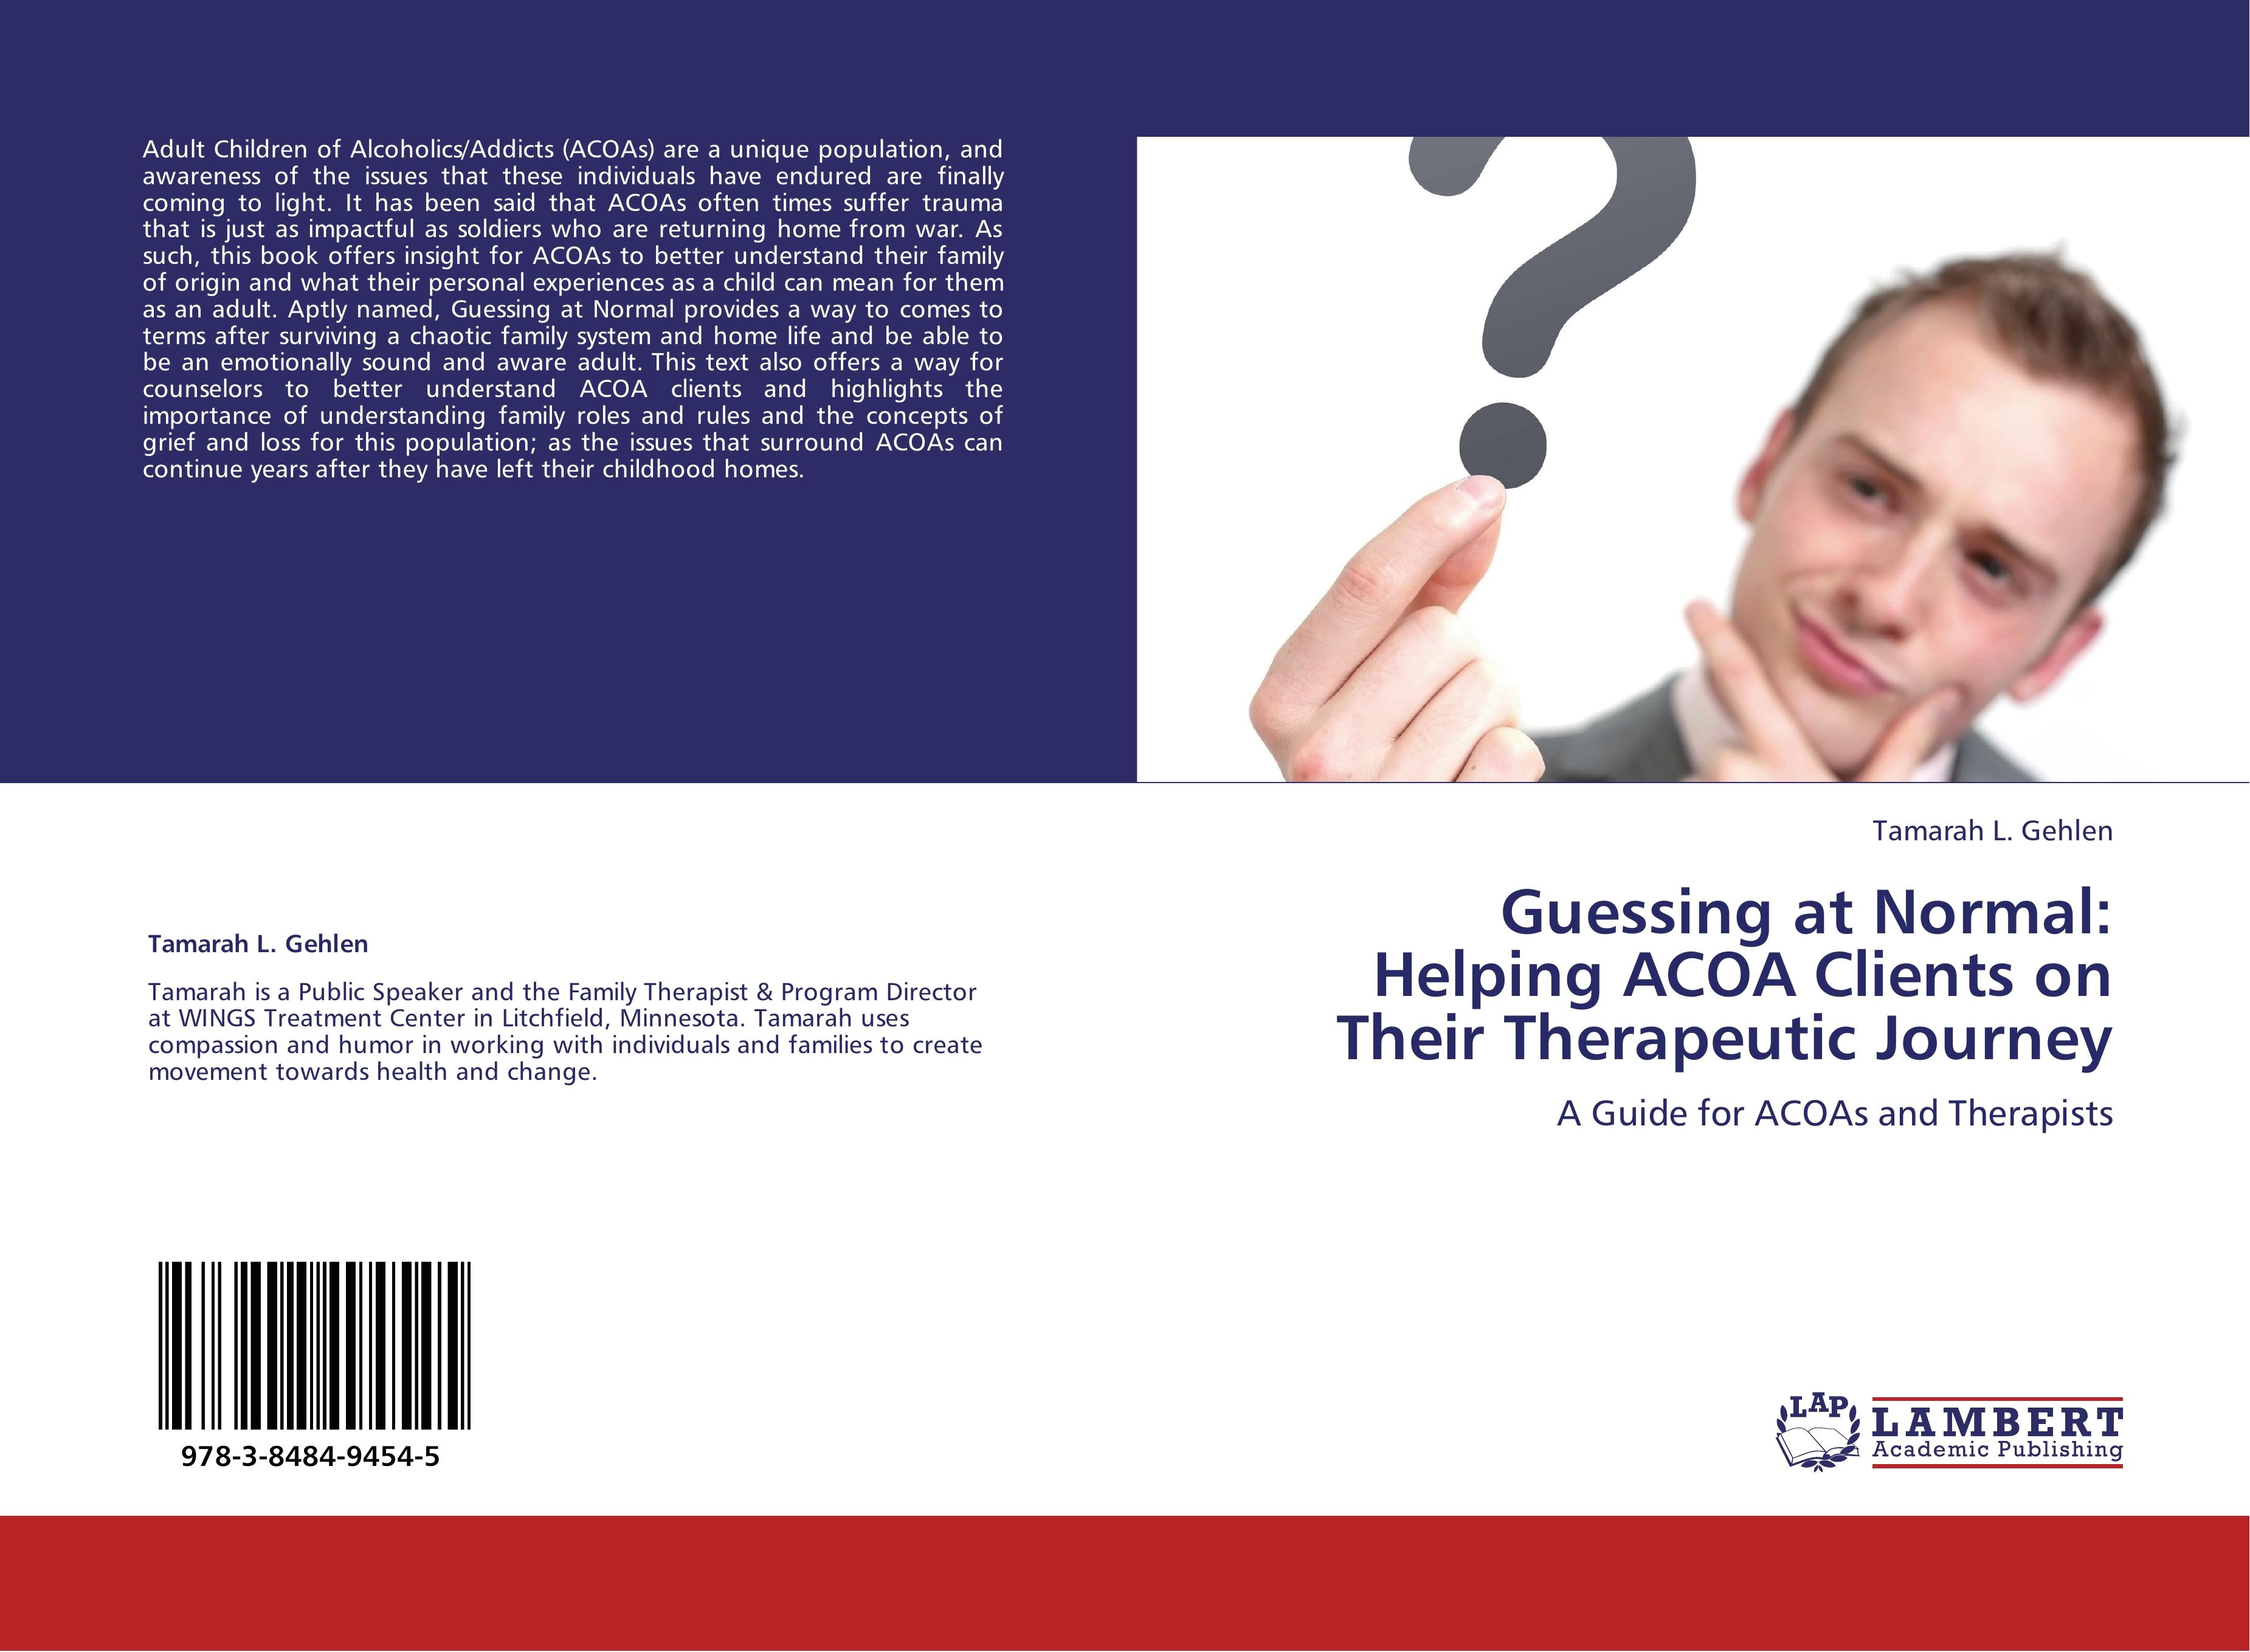 Guessing at Normal: Helping ACOA Clients on Their Therapeutic Journey / A Guide for ACOAs and Therapists / Tamarah L. Gehlen / Taschenbuch / Paperback / 52 S. / Englisch / 2012 / EAN 9783848494545 - Gehlen, Tamarah L.